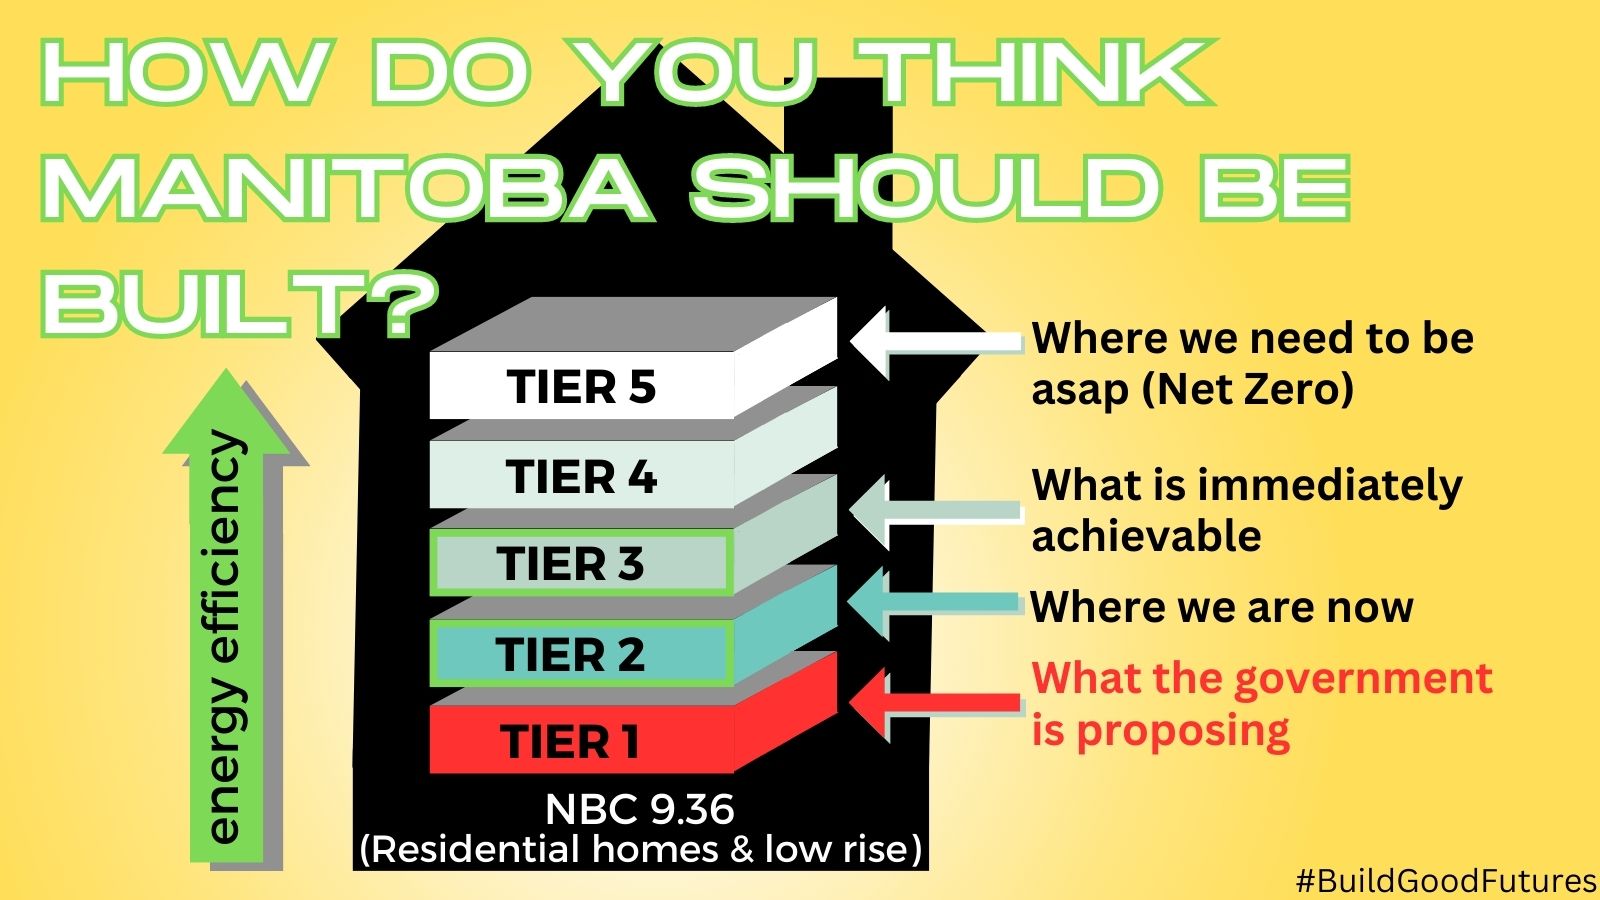 How do you think Manitoba should be built? Tier 1 what the government is proposing Tier 2 where we are now Tier 3 what is immediately achievable Tier 5 where we need to be asap (net zero) Energy efficiency goes up as you go through the Tiers NBC 9.36 (residential homes and low rise)